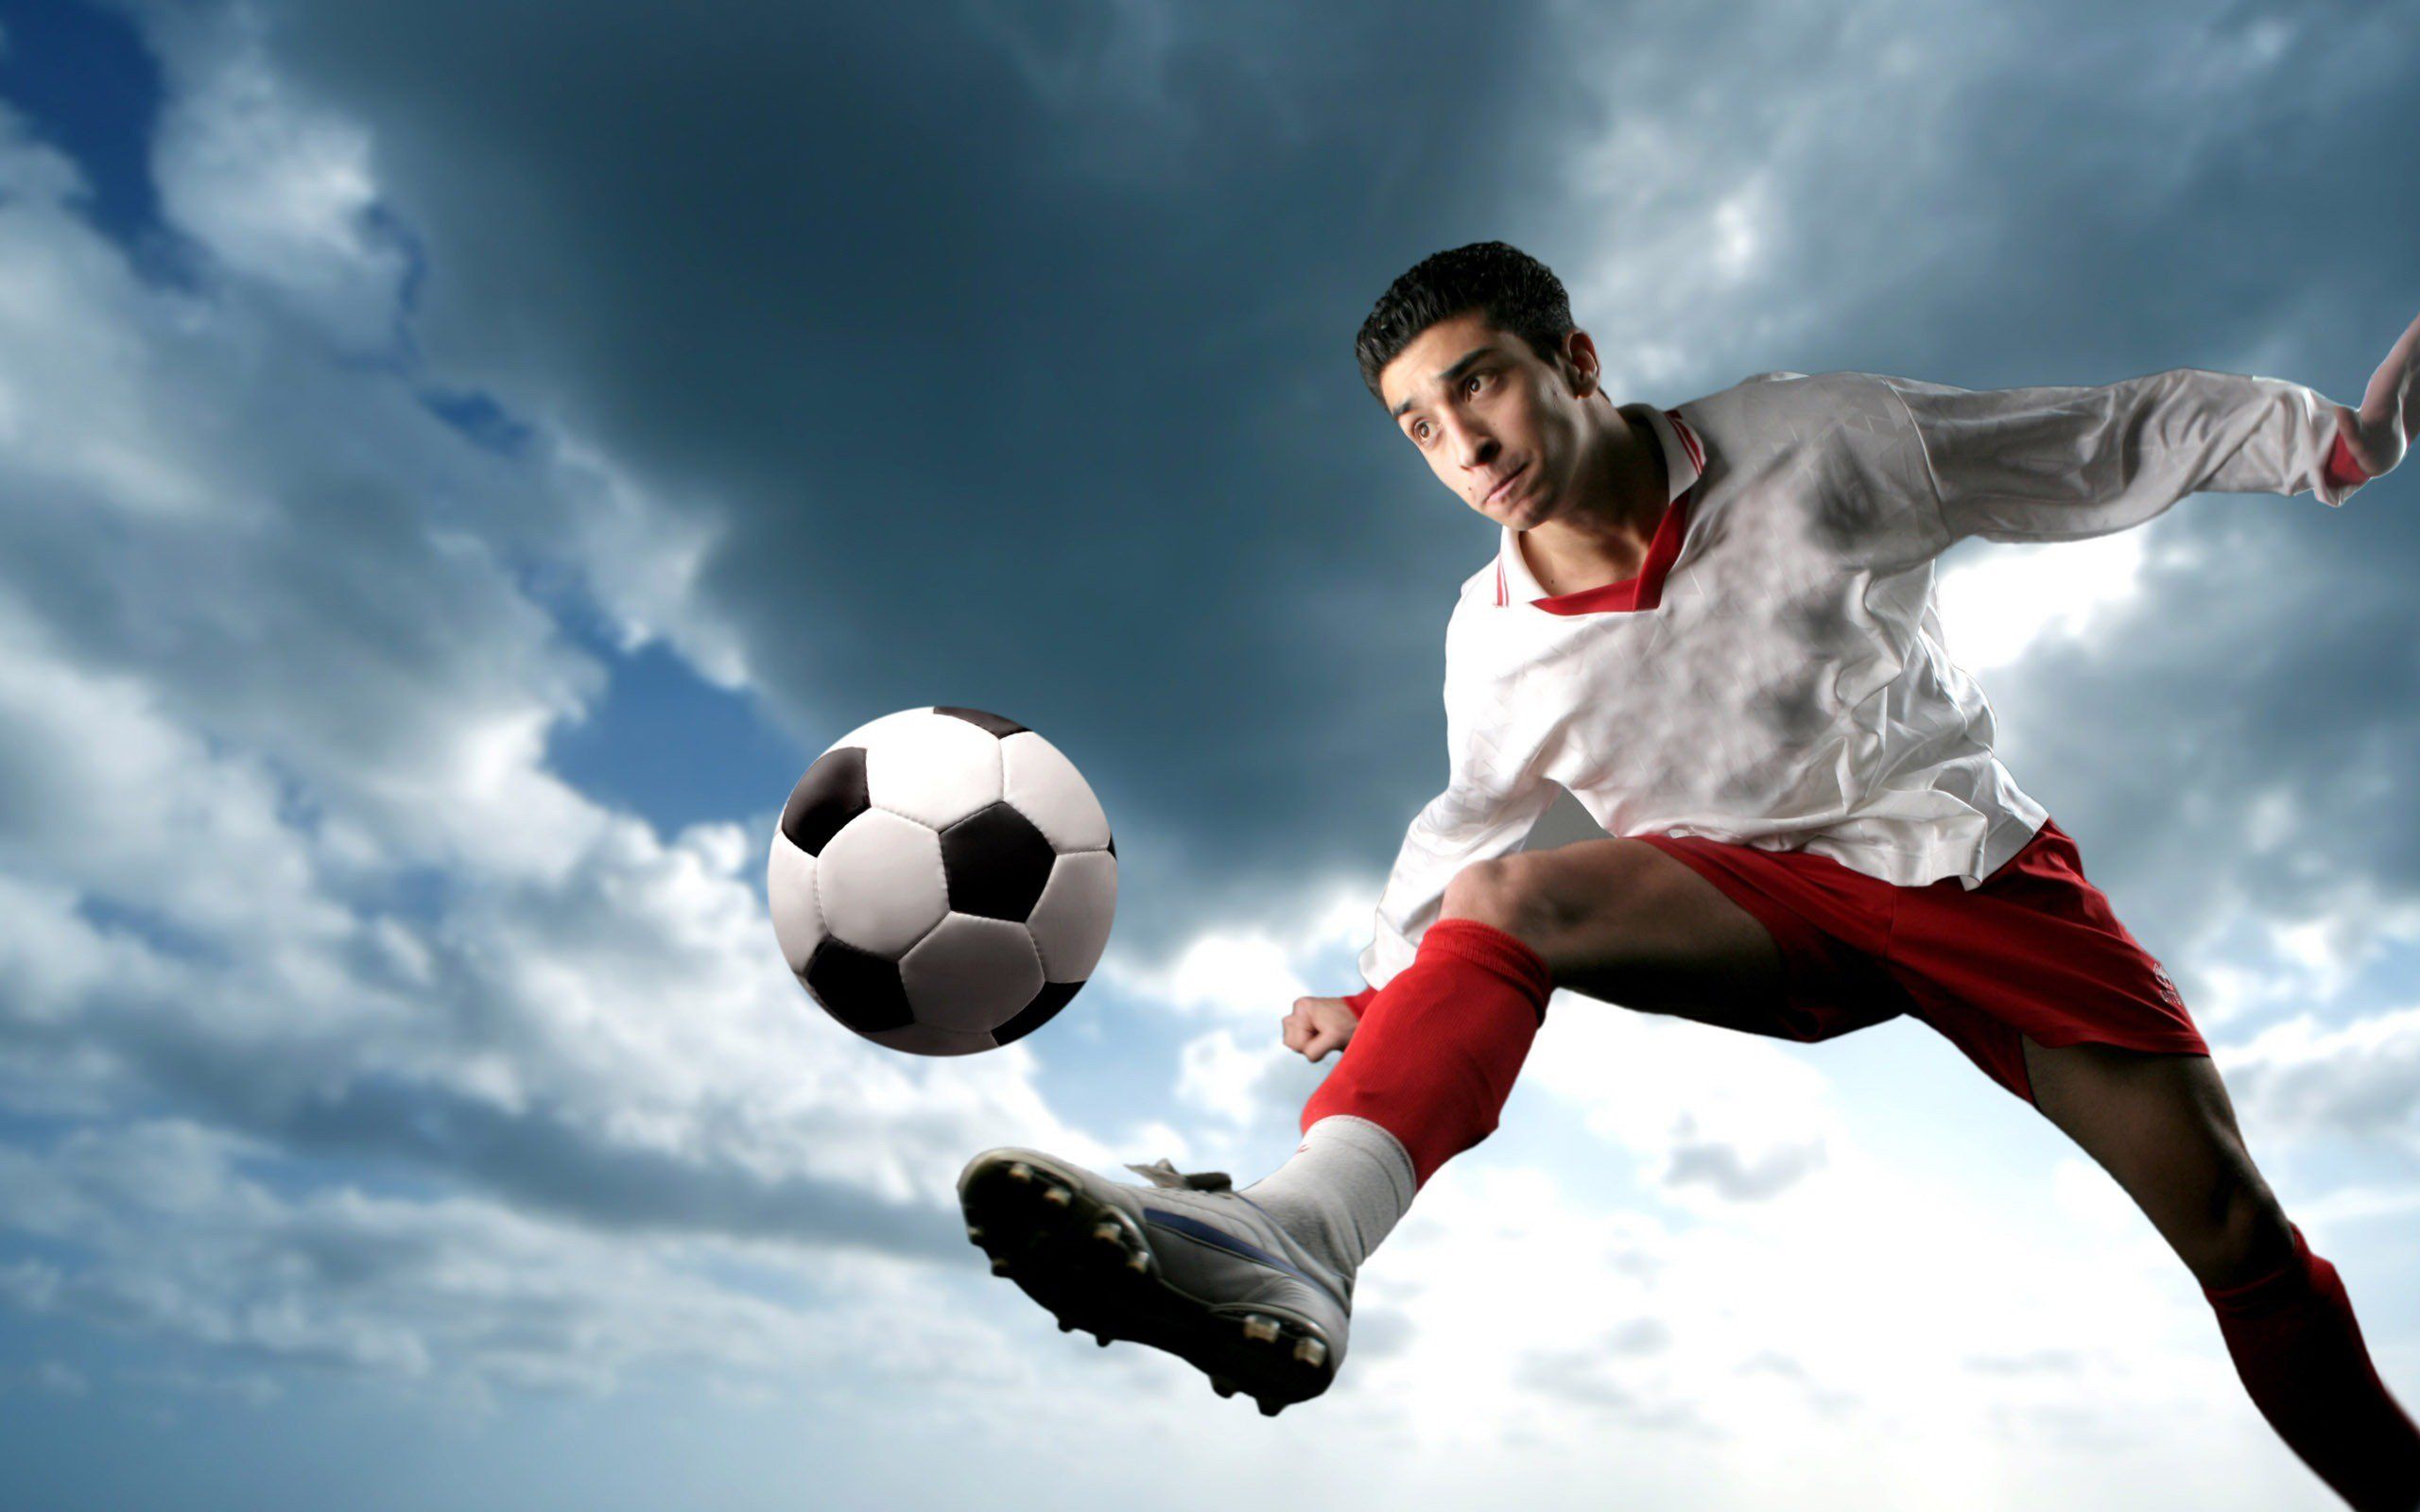 Free Soccer Player, Download Free Clip Art, Free Clip Art